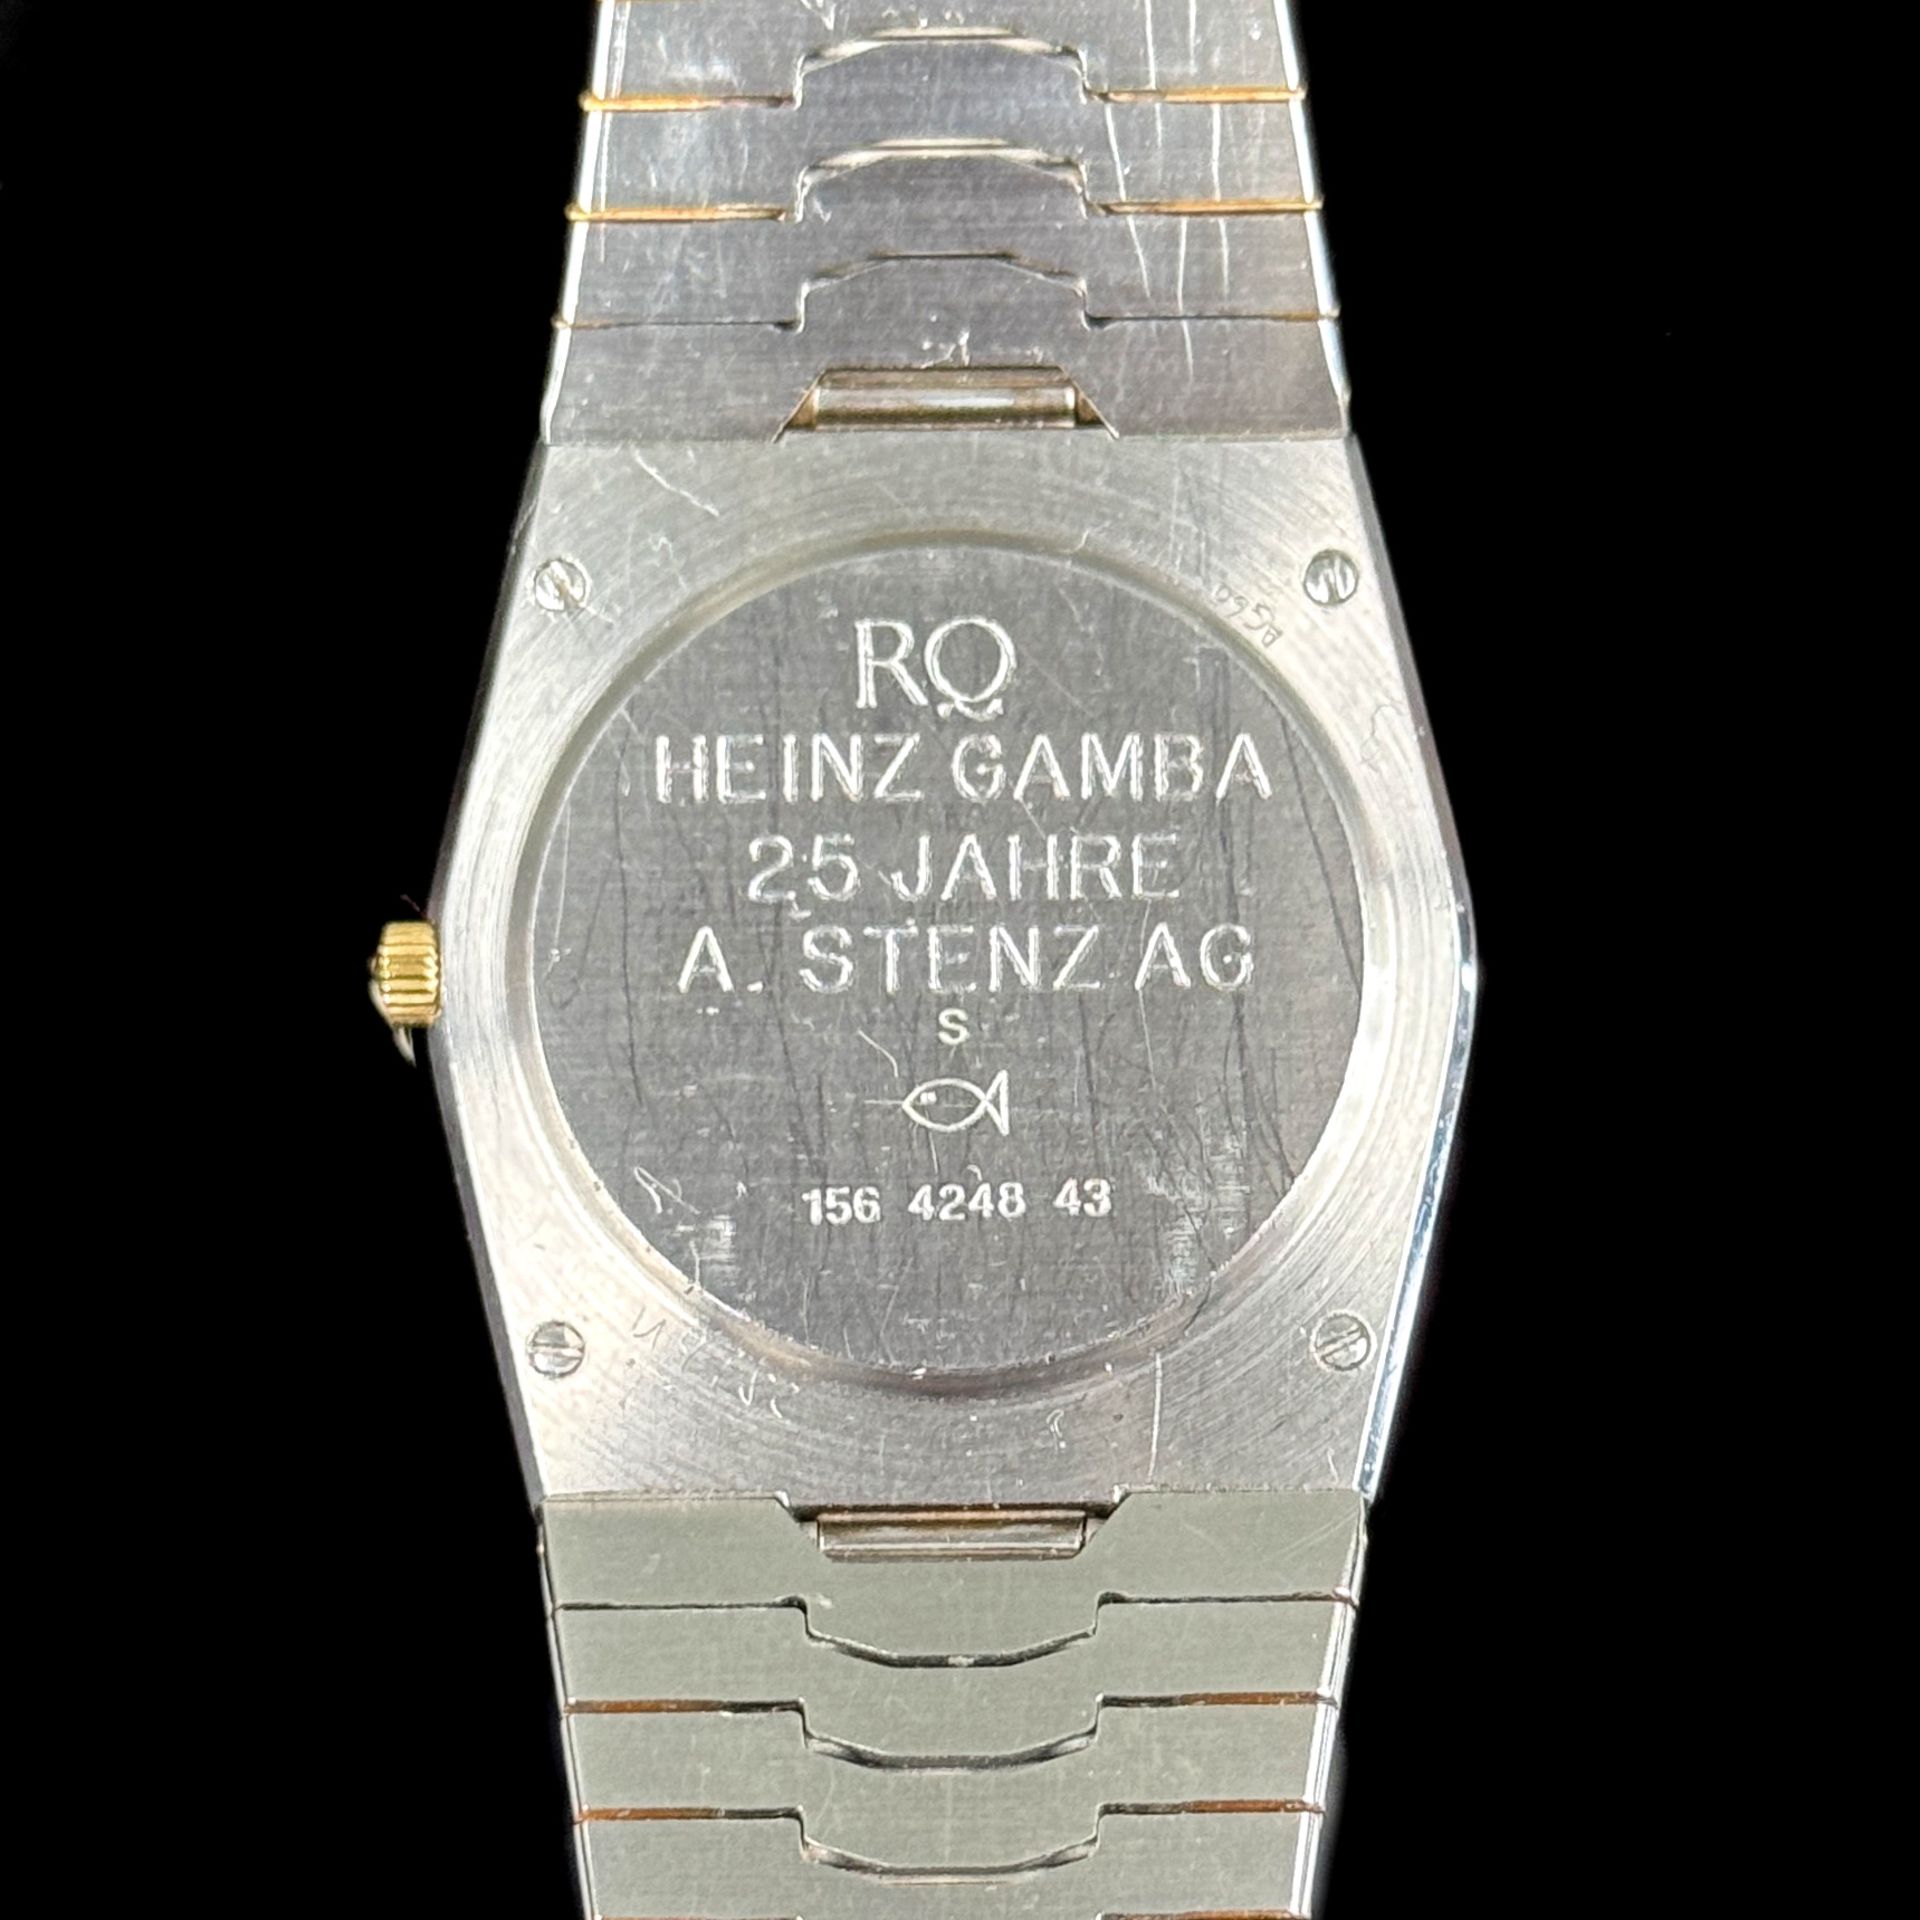 Wristwatch, Eterna Royal, quartz, running, circa 1980, dial with indices. Date display at number 3, - Image 3 of 3